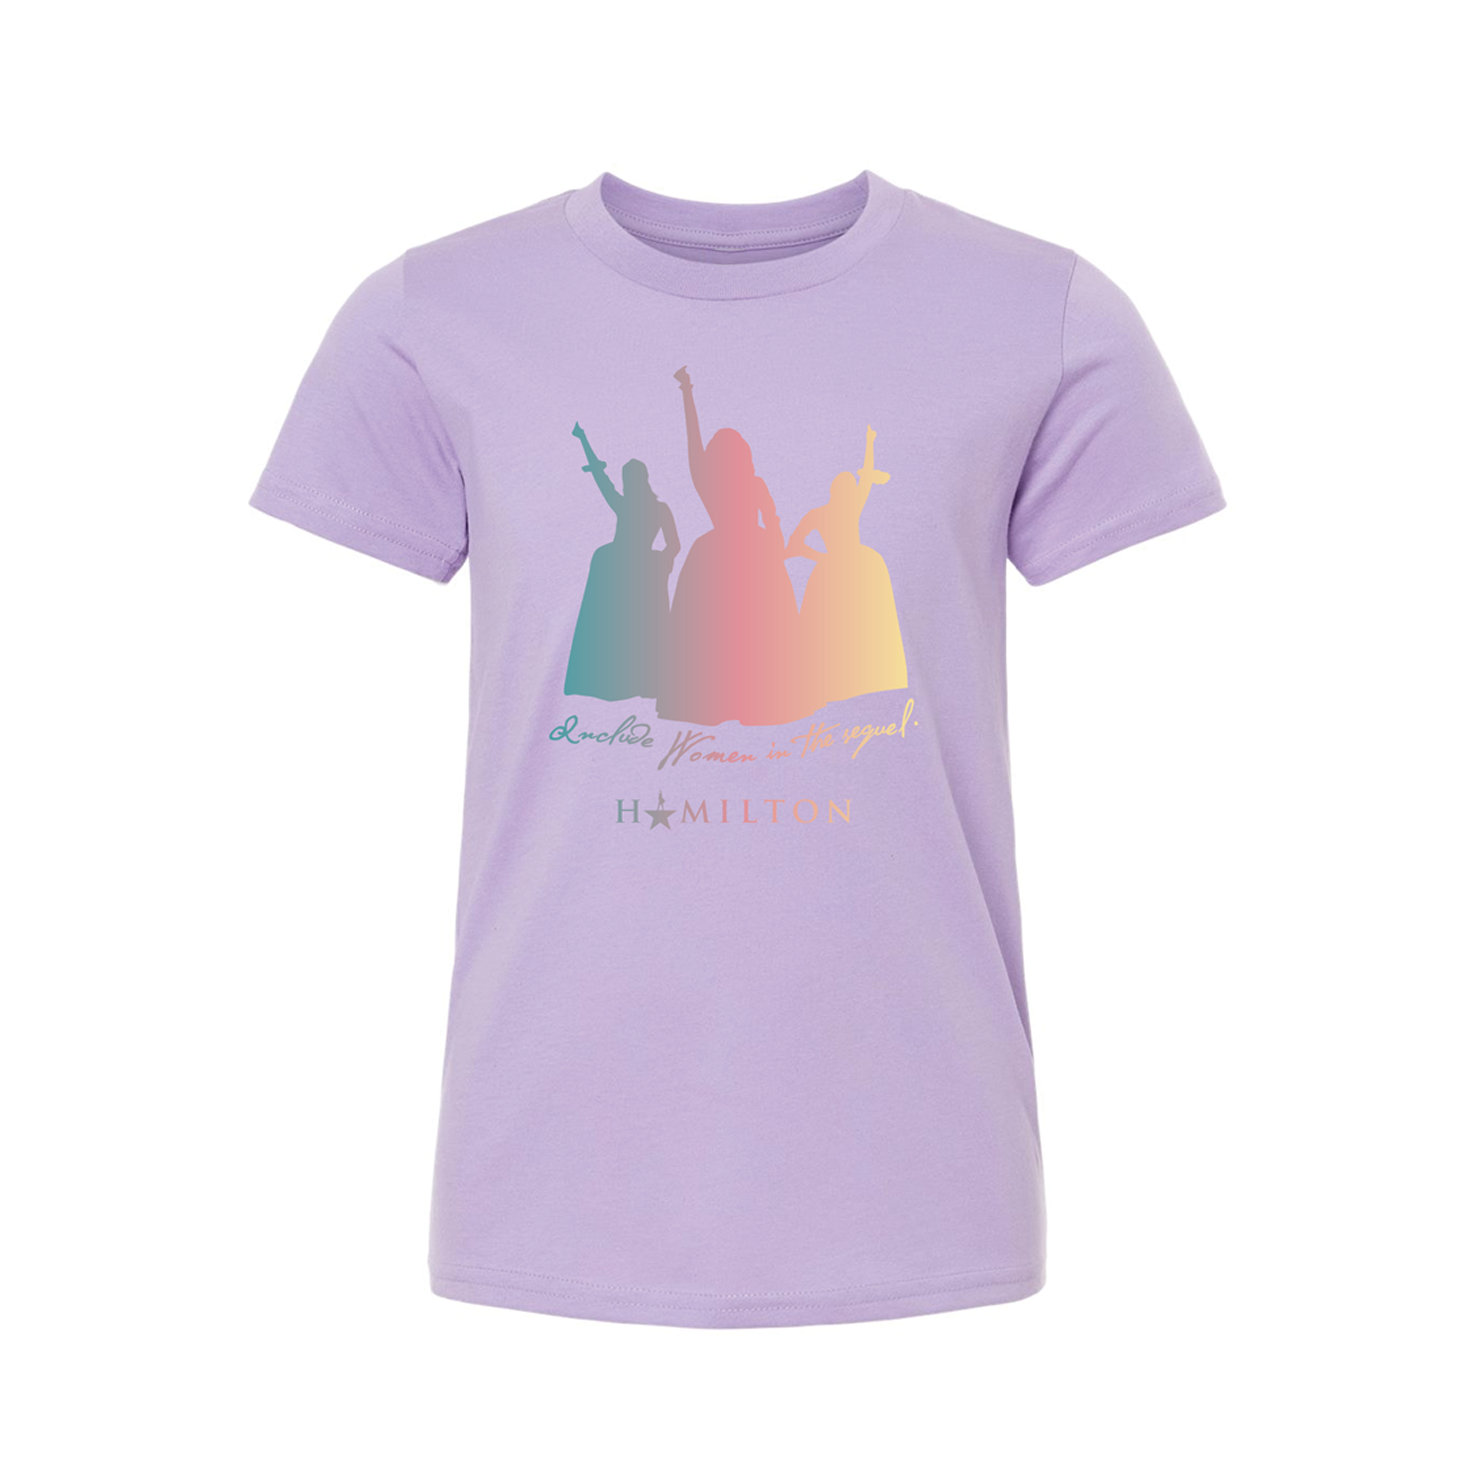 HAMILTON Women In The Sequel Youth Tee - Image 2